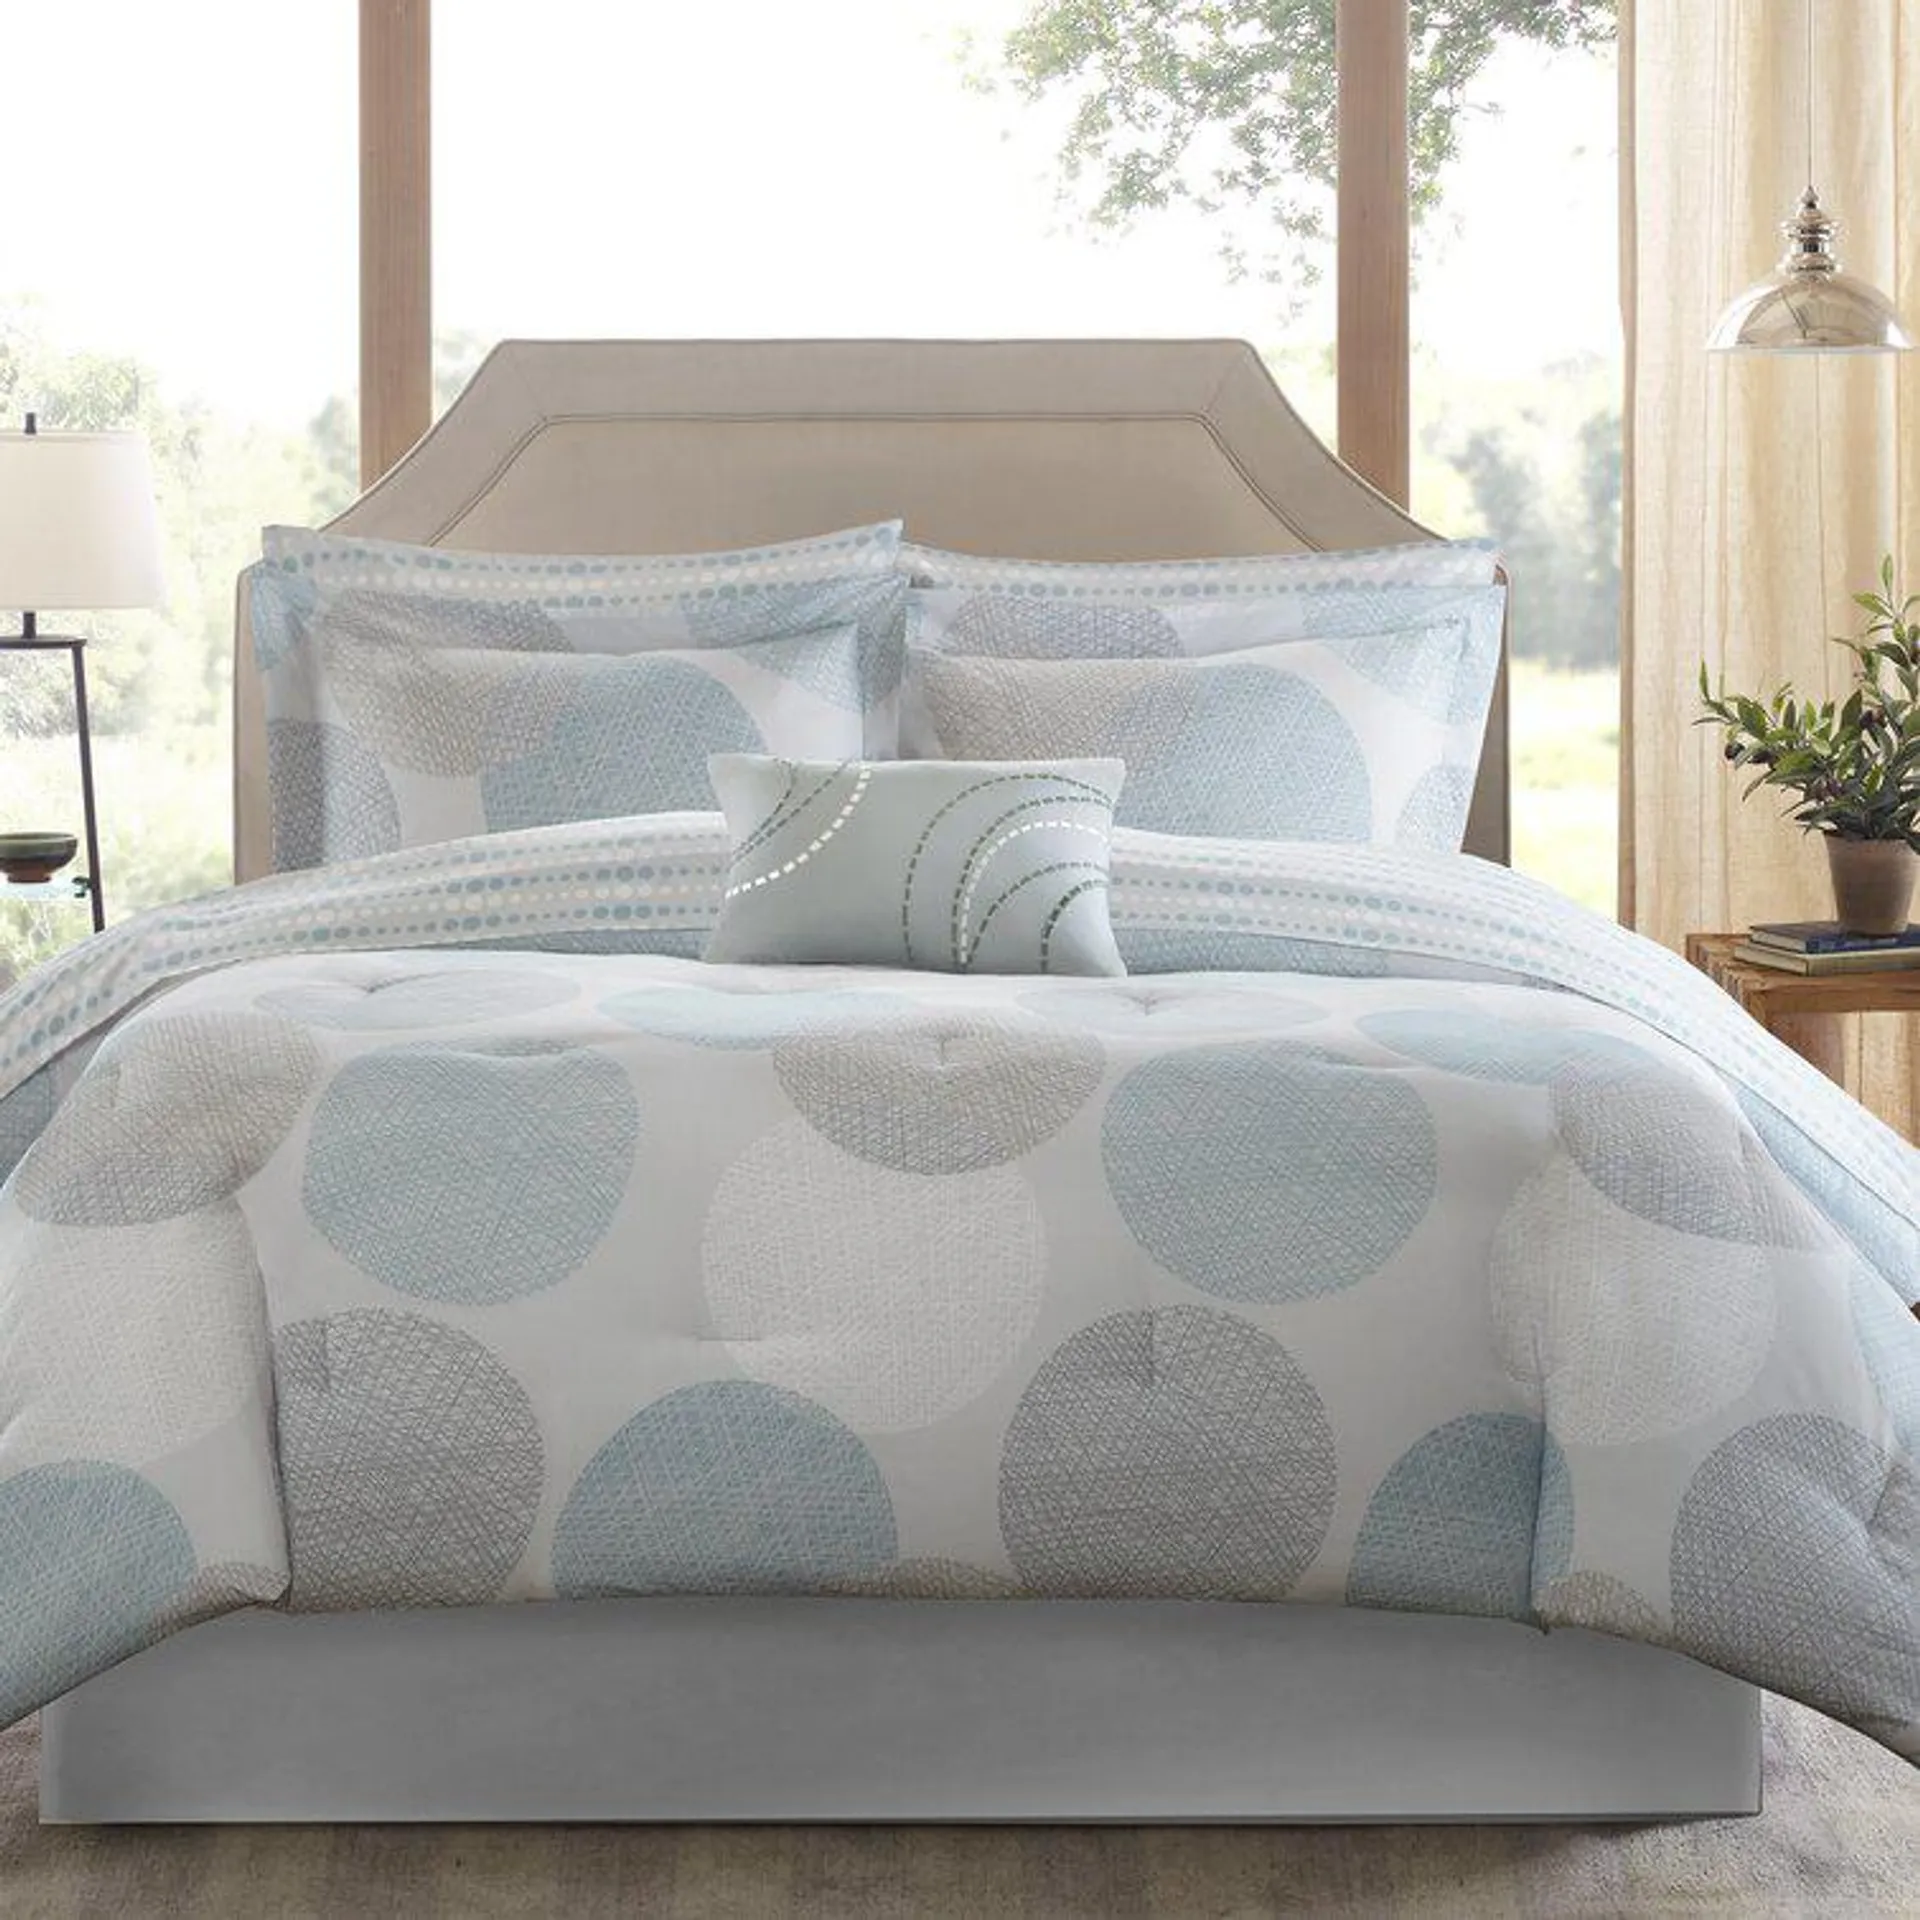 Jarico Comforter Set with Cotton Bed Sheets